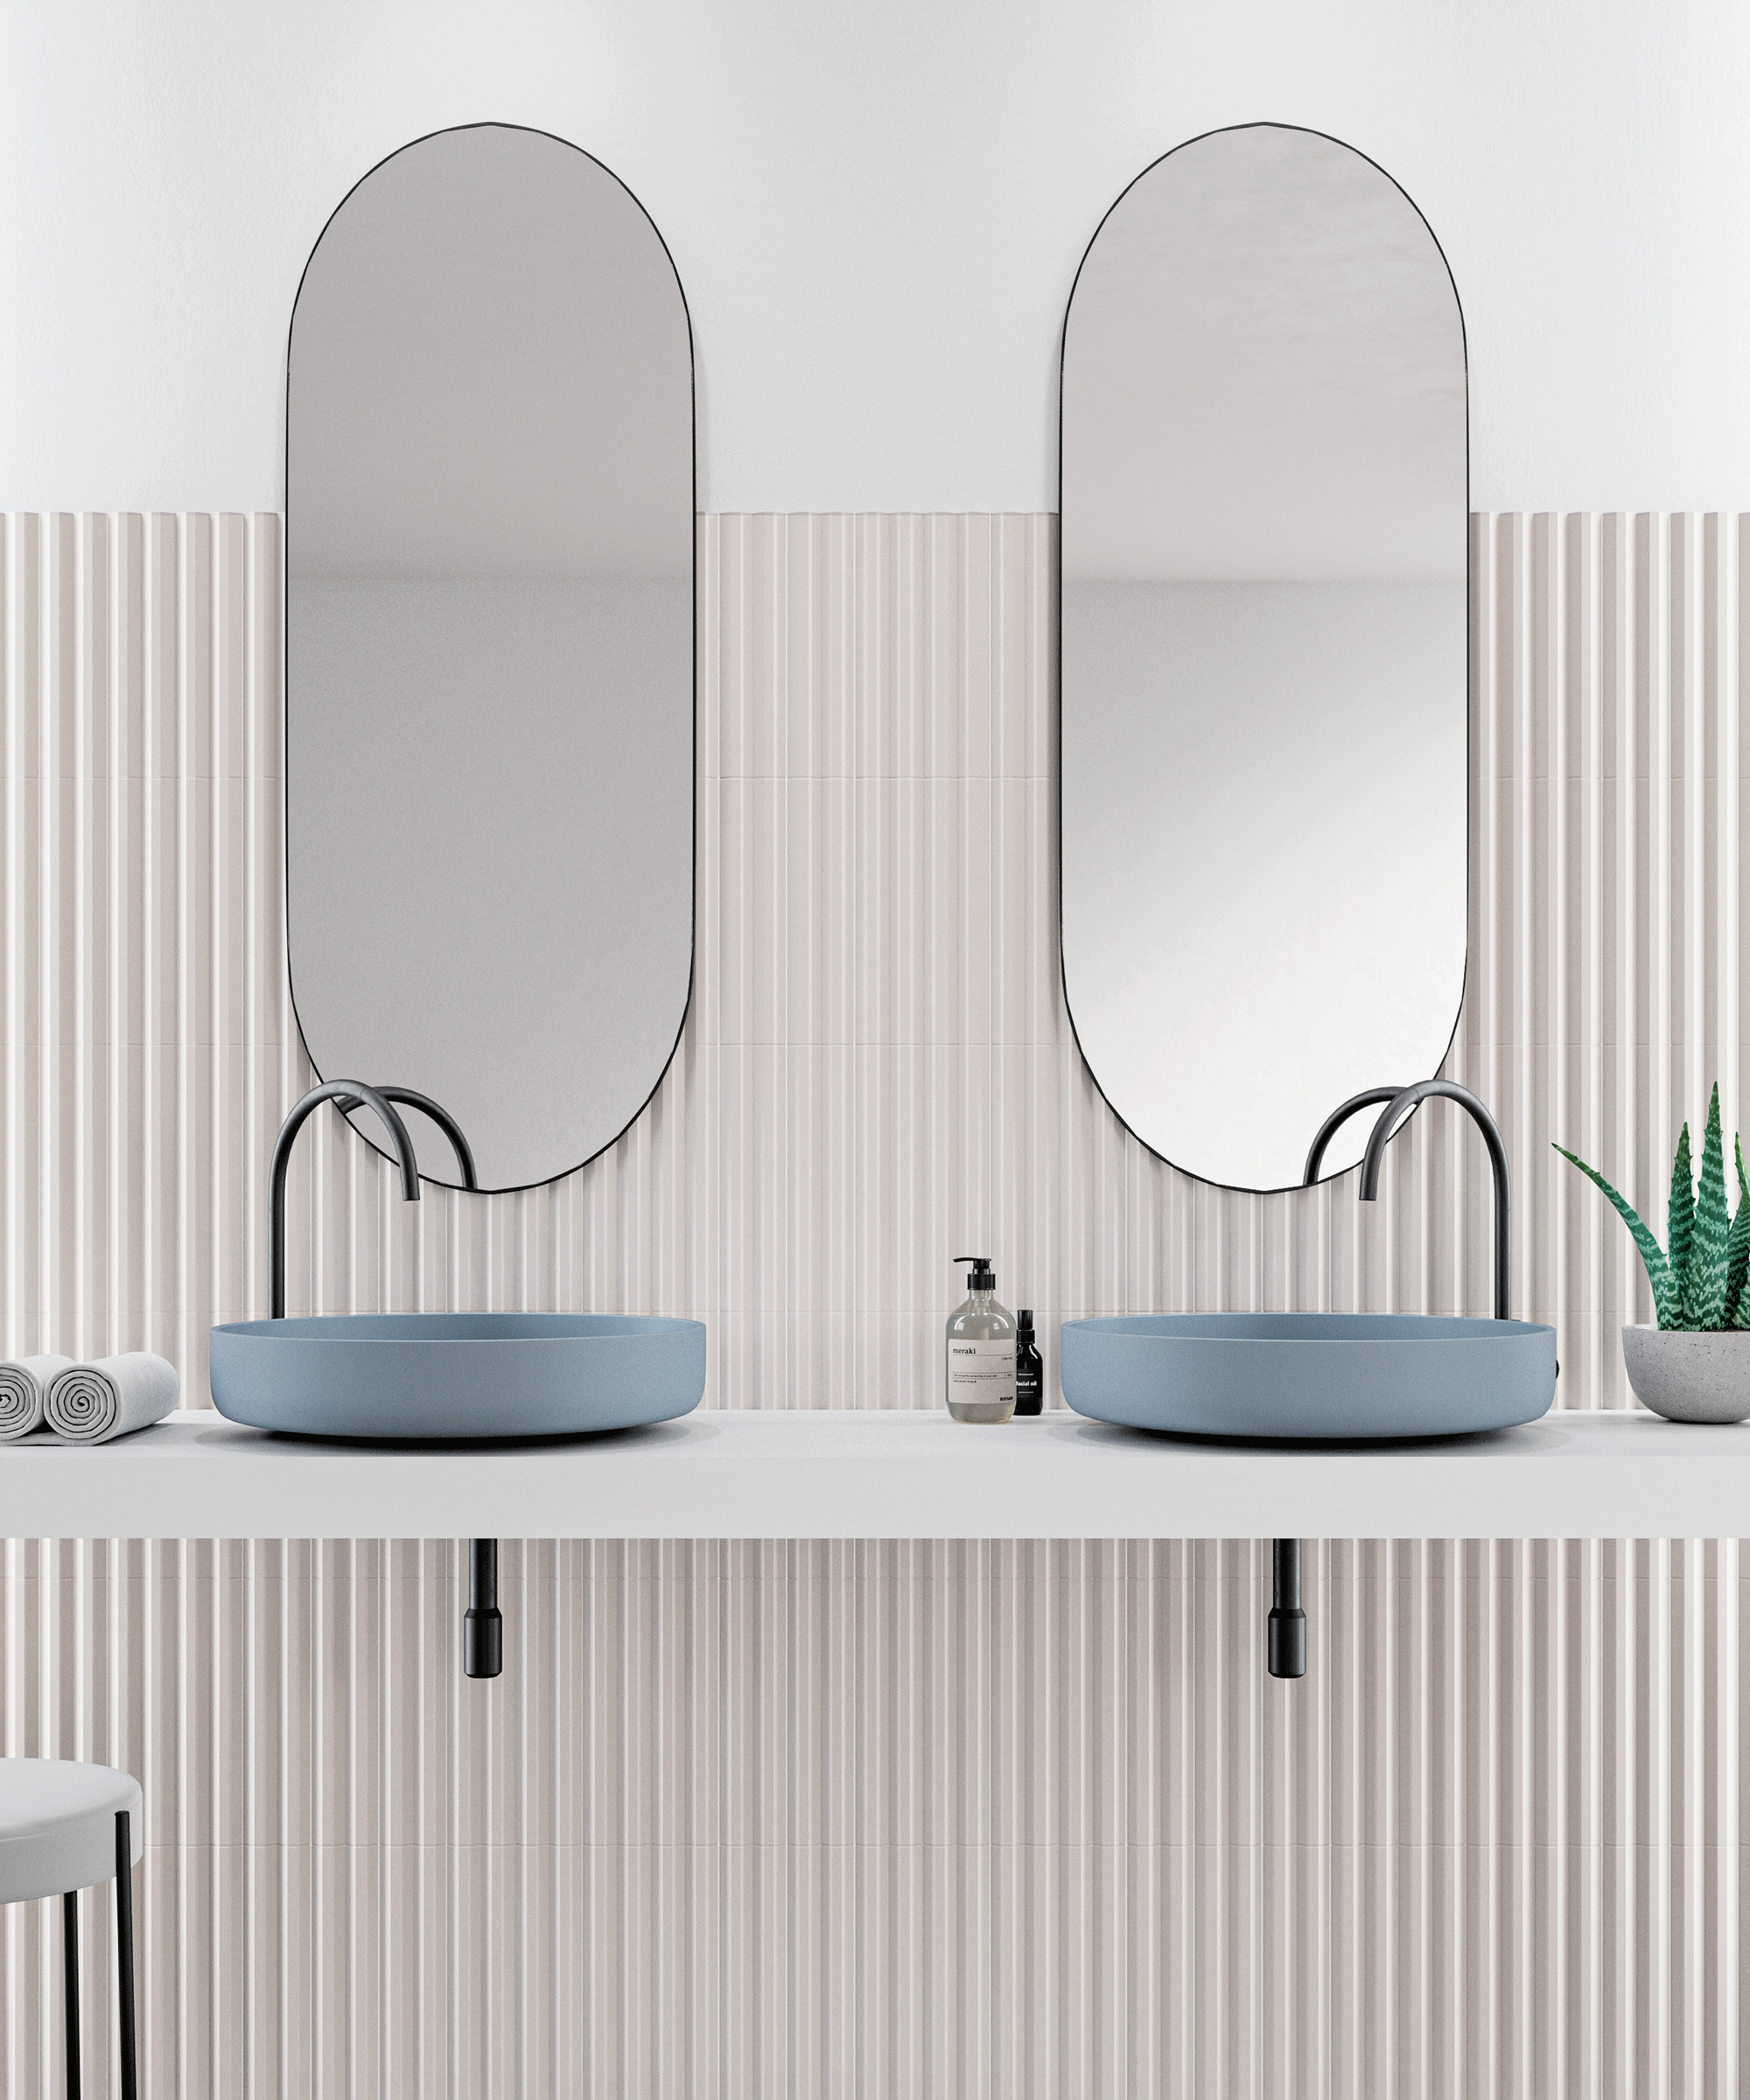 A double bathroom vanity with blue sinks in front of symmetrical mirrors and a ribbed wall